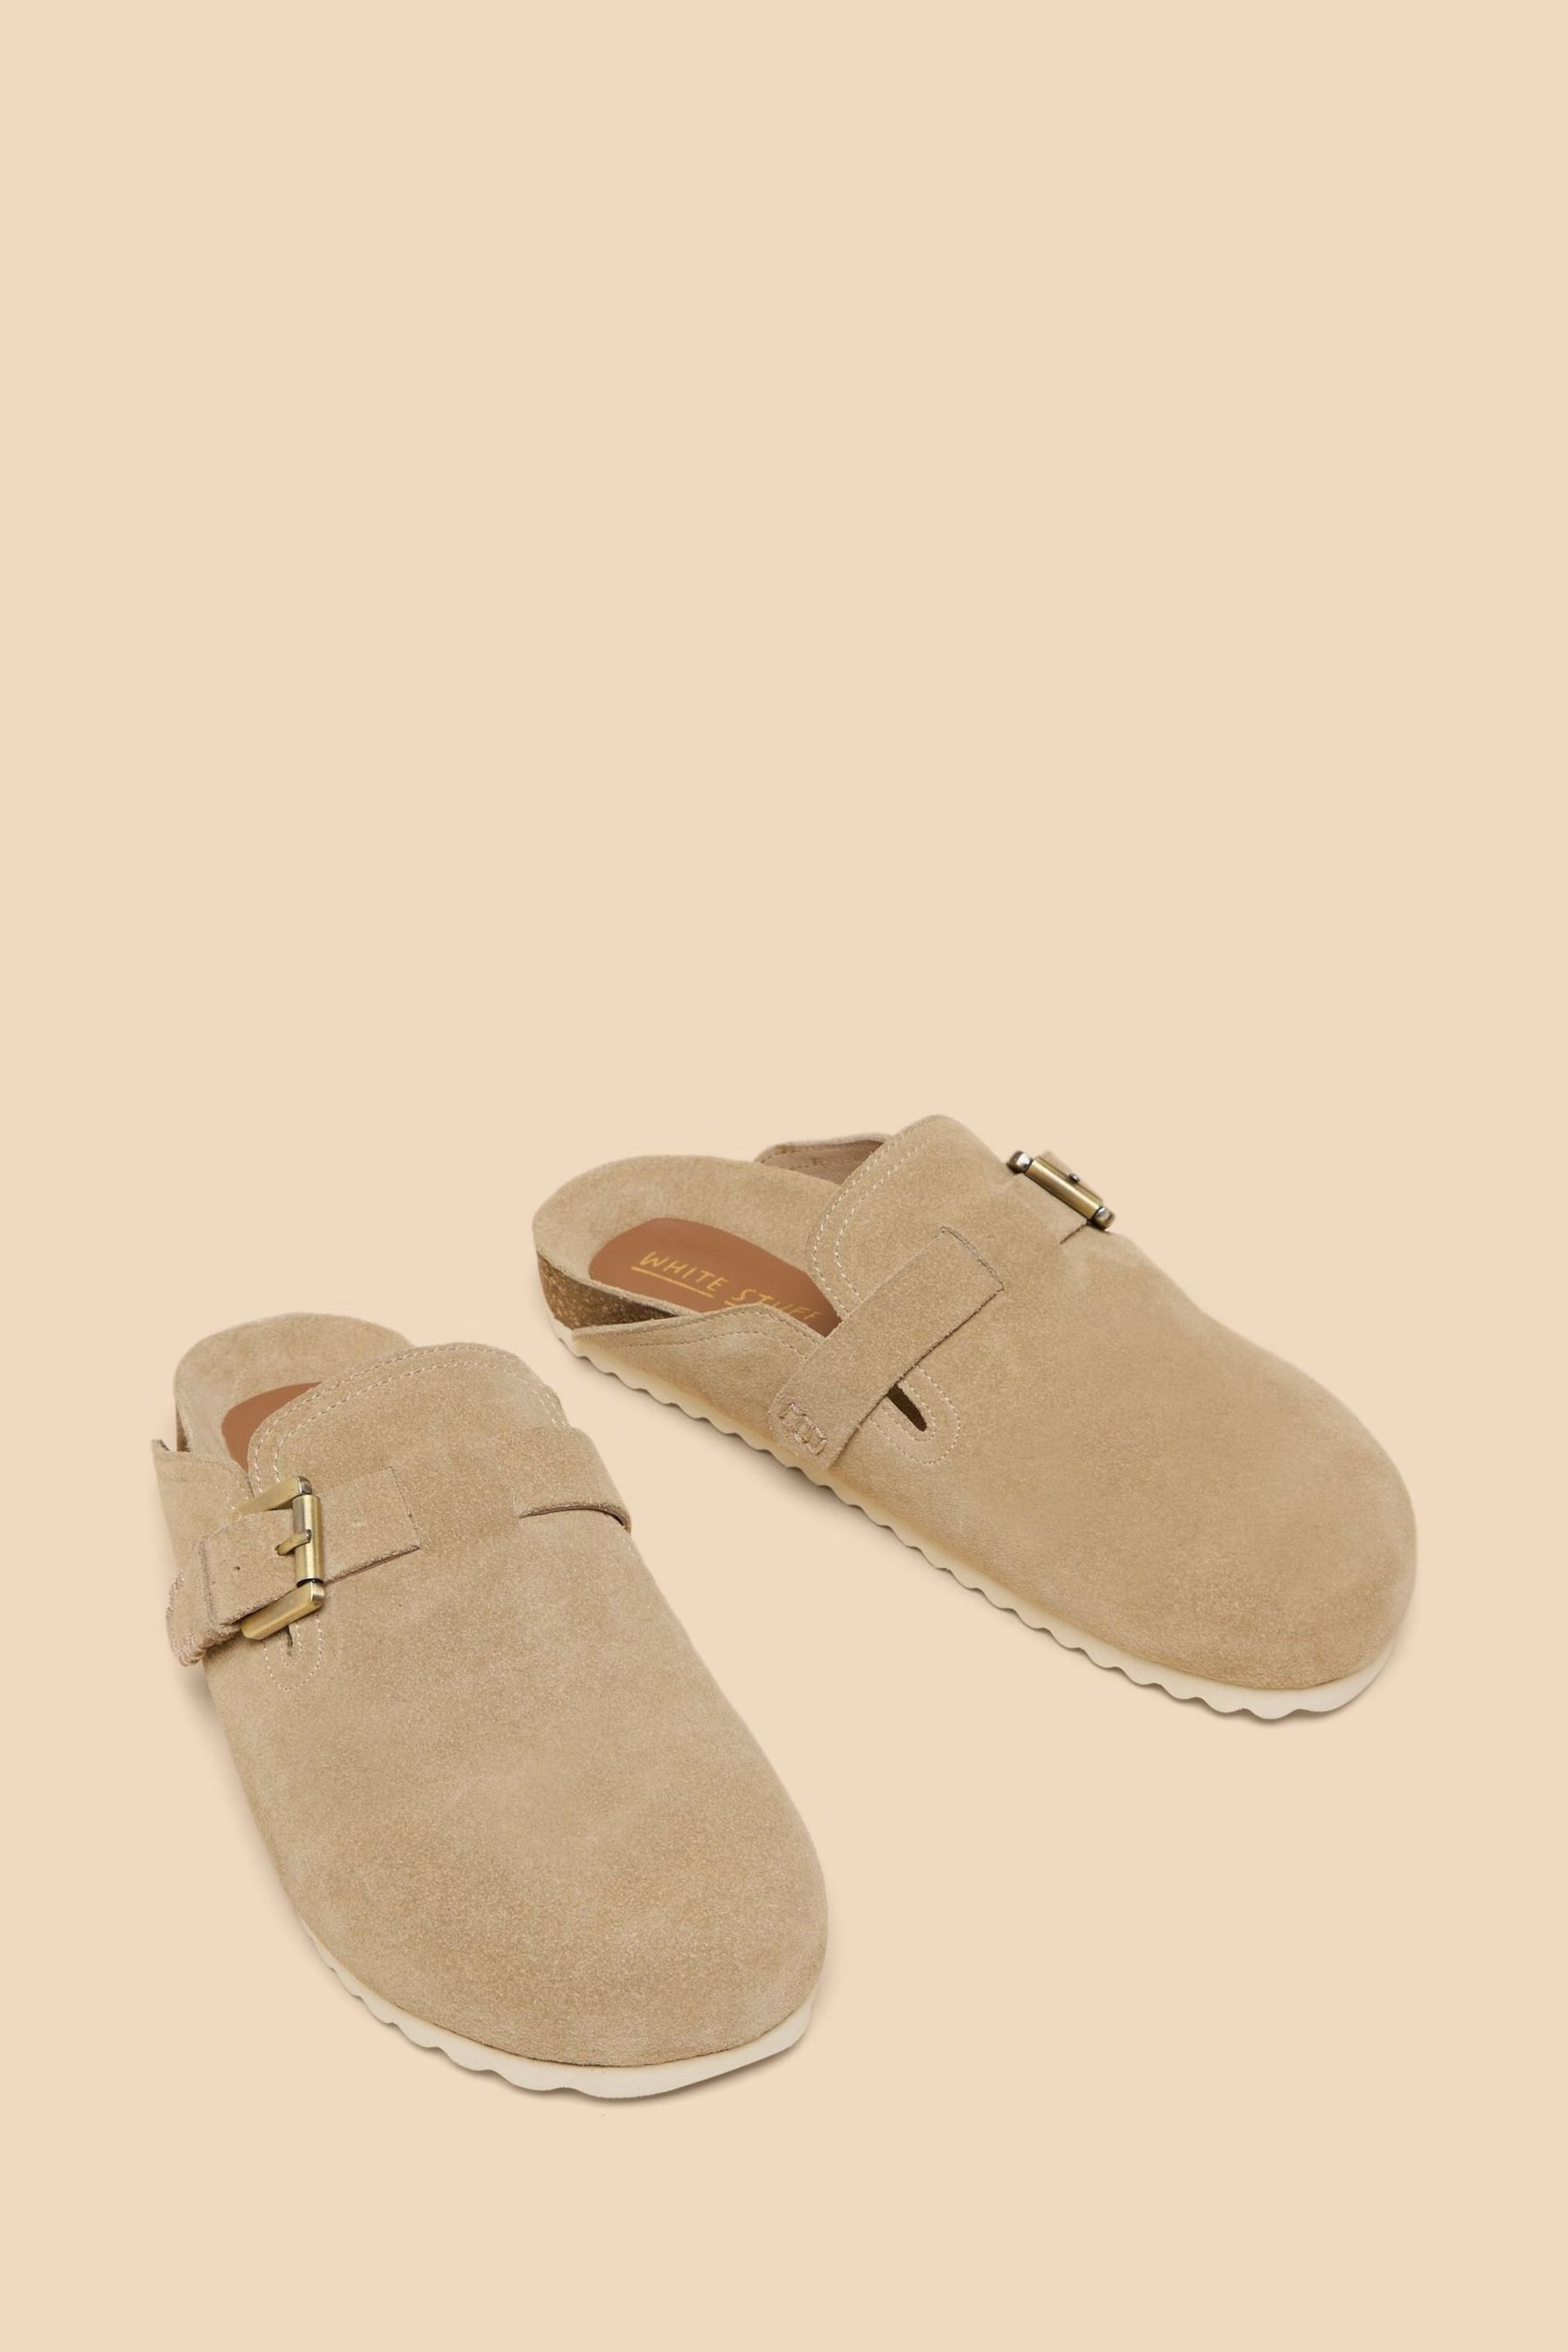 White Stuff Brown Myrtle Suede Slip On Mules - Image 2 of 4